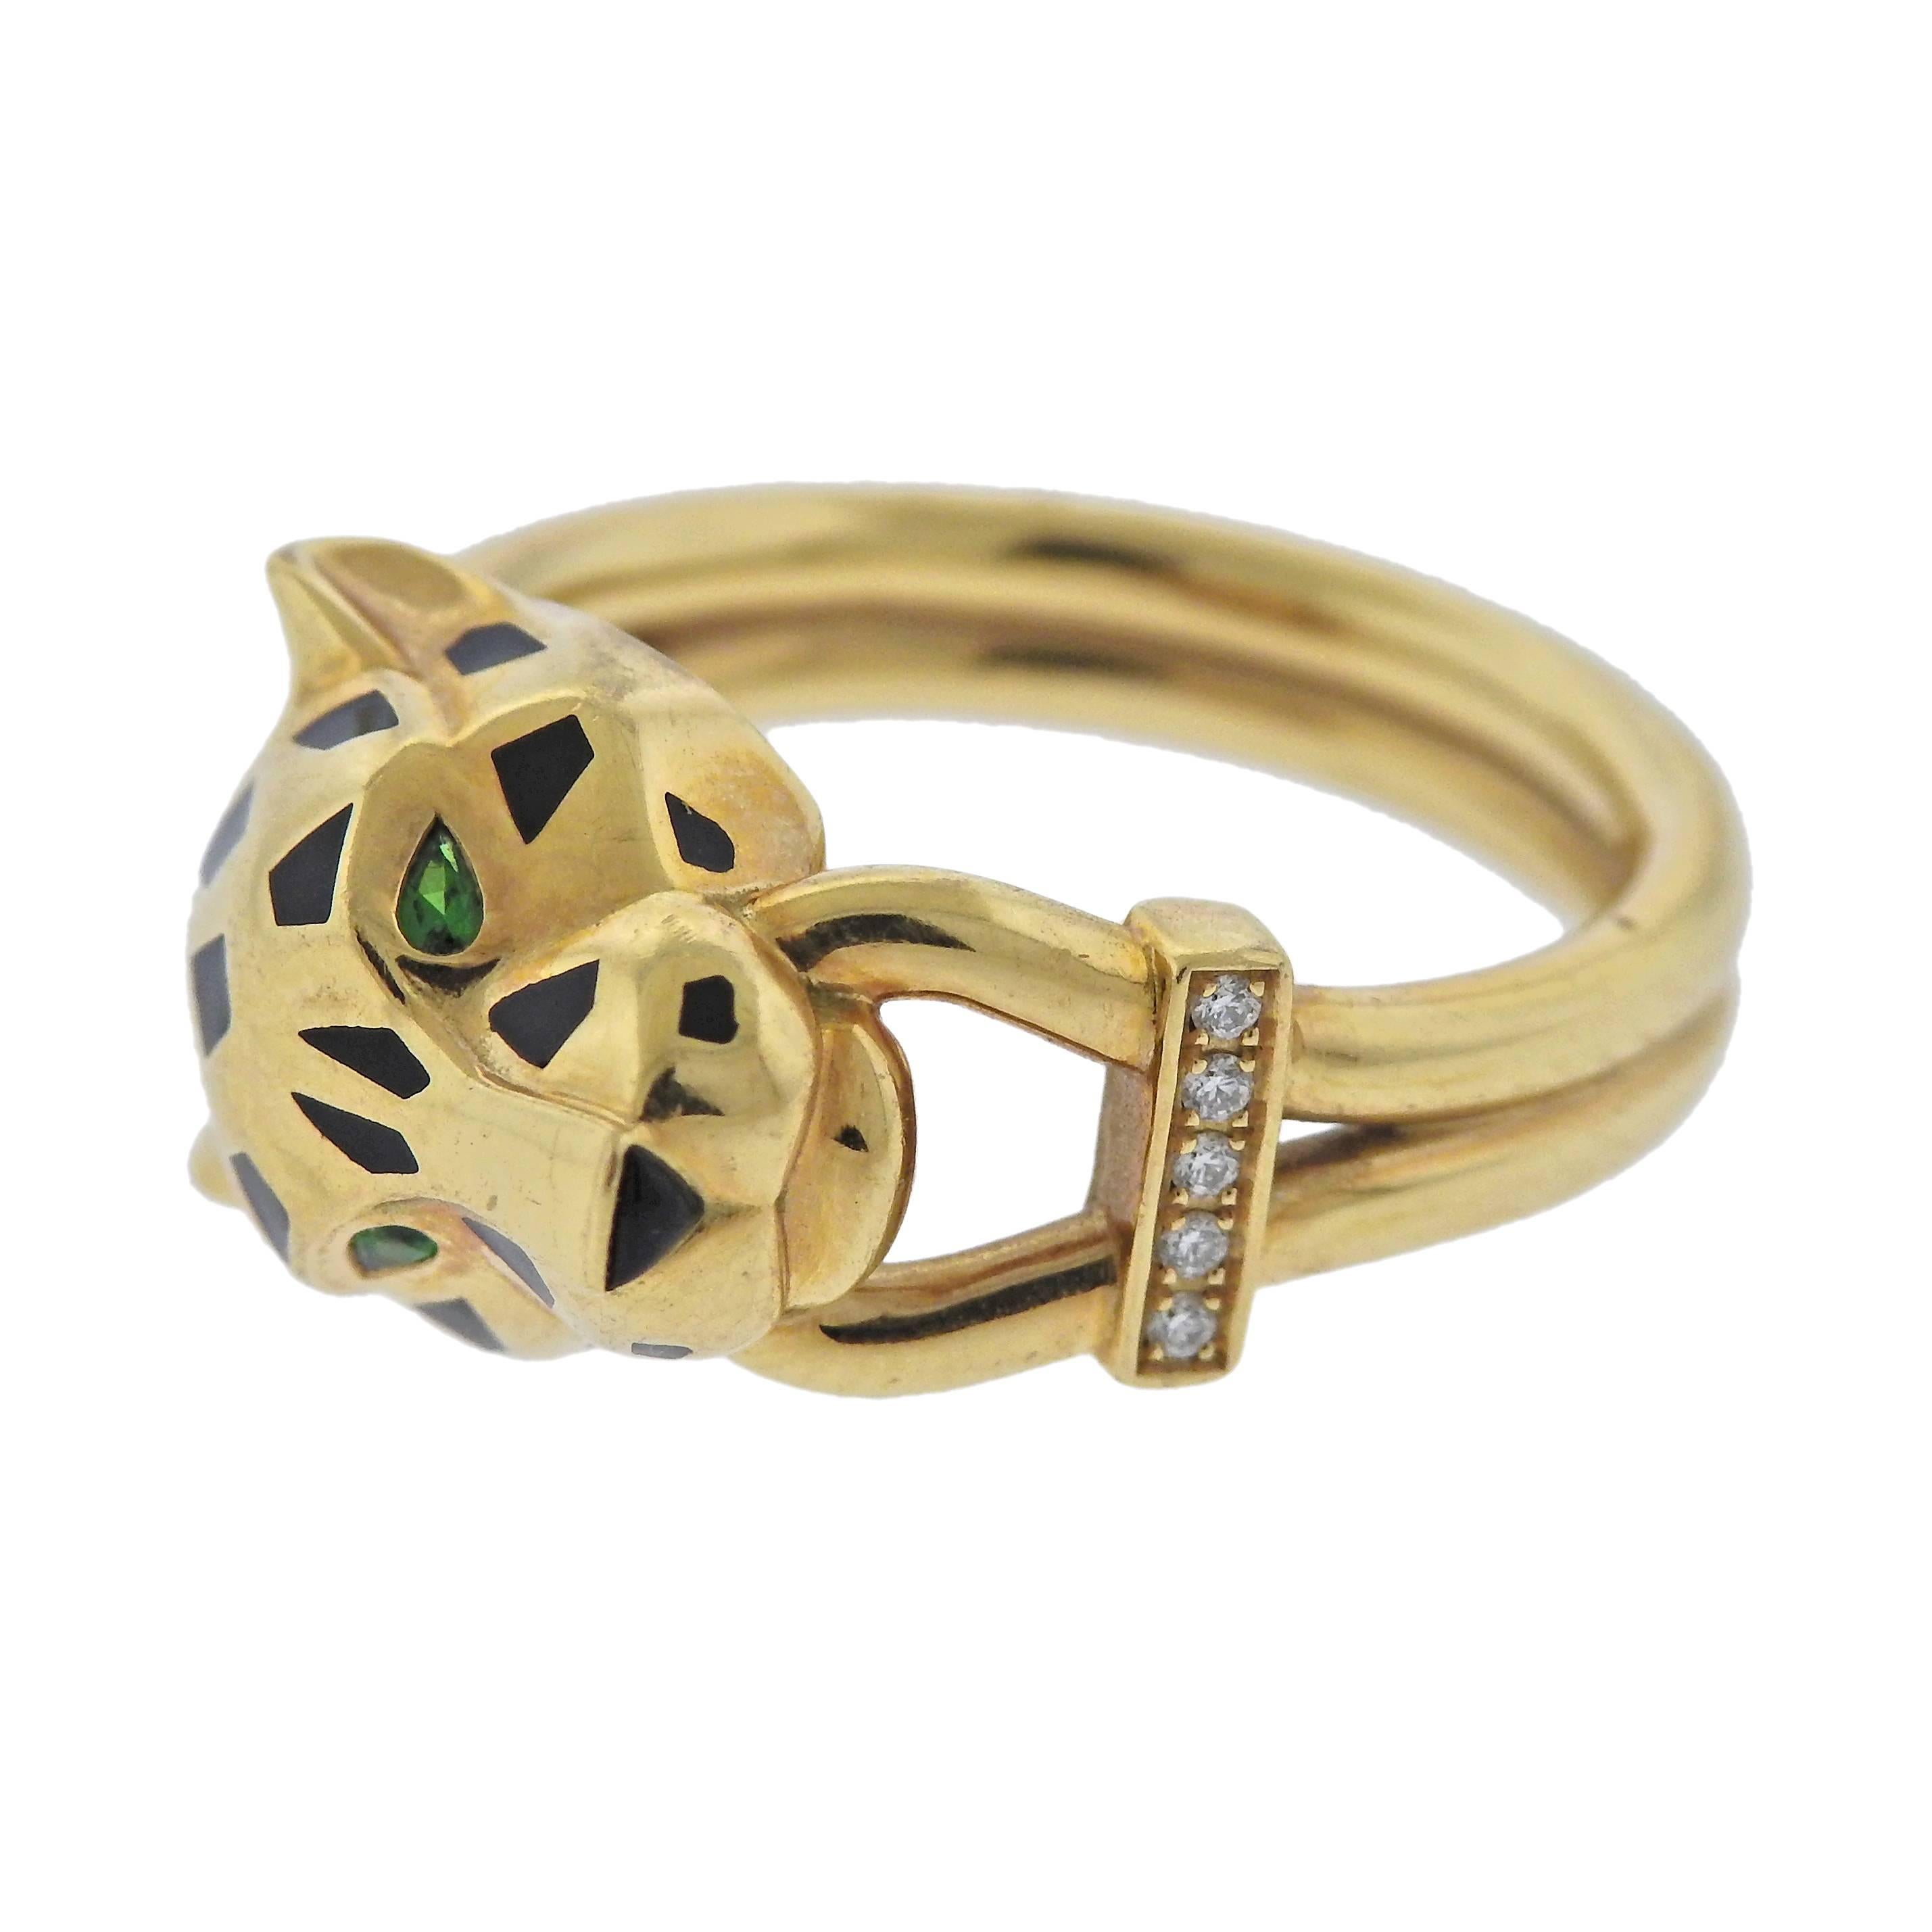 Pathere de Cartier 18k gold ring, designed by Cartier, decorated with black enamel, tsavorite garnet eyes and 0.02ctw G/VS diamonds. Retail $7550. Comes with box and COA. Ring size - 6.25, ring top (panther head) measures 10.7mm x 13.7mm, weighs